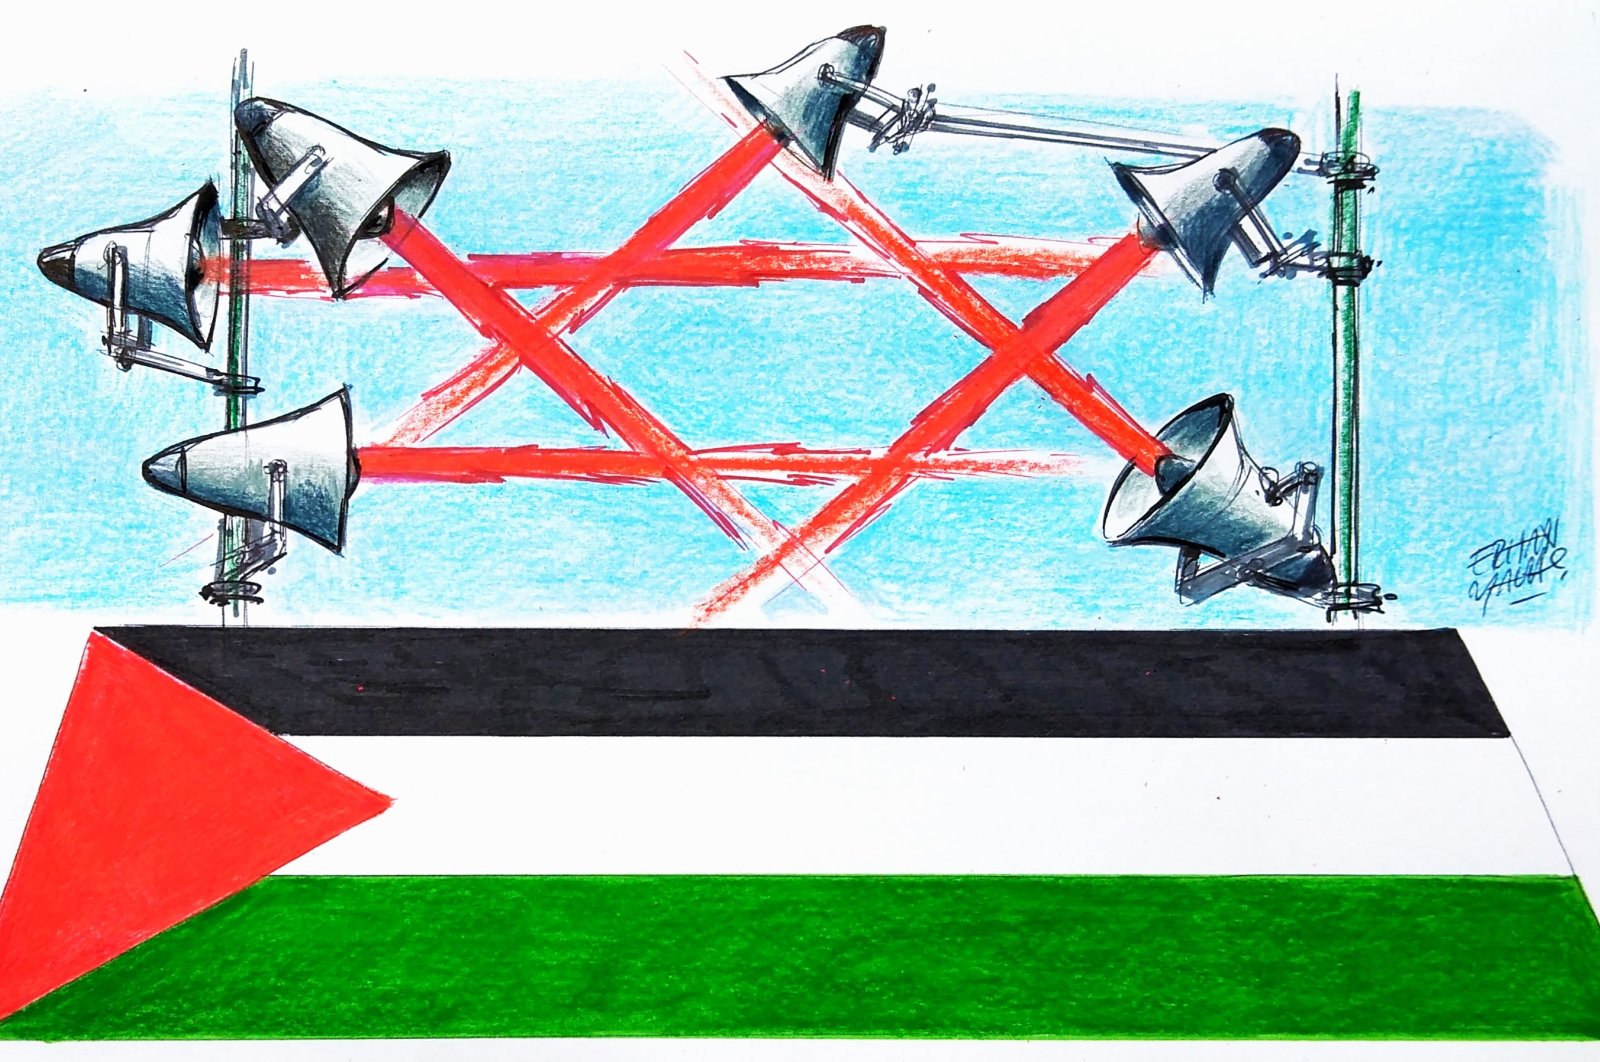 Videos shared online of Israel&#039;s attacks on Gaza usually start with a warning of a &quot;code red,&quot; followed by panic as people look for places to hide. (Illustration by Erhan Yalvaç)